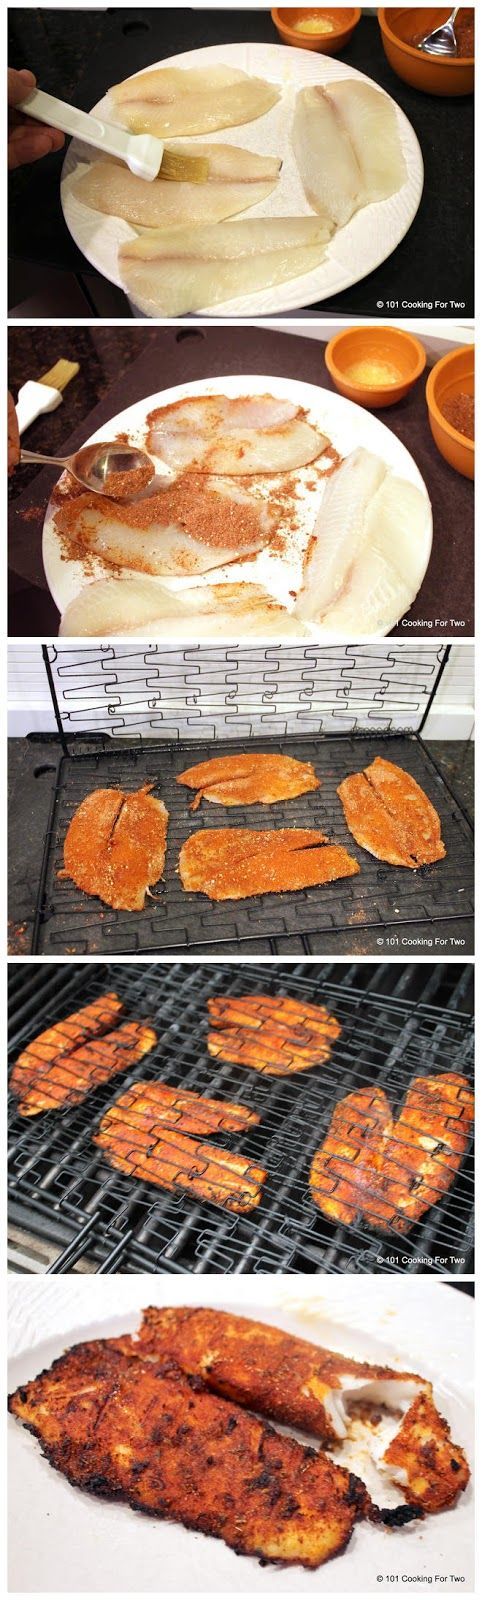 Grilled Blackened Tilapia – nice and easy blackened recipe.  The brown sugar adds a hint of sweetness.  I tried on salmon too and